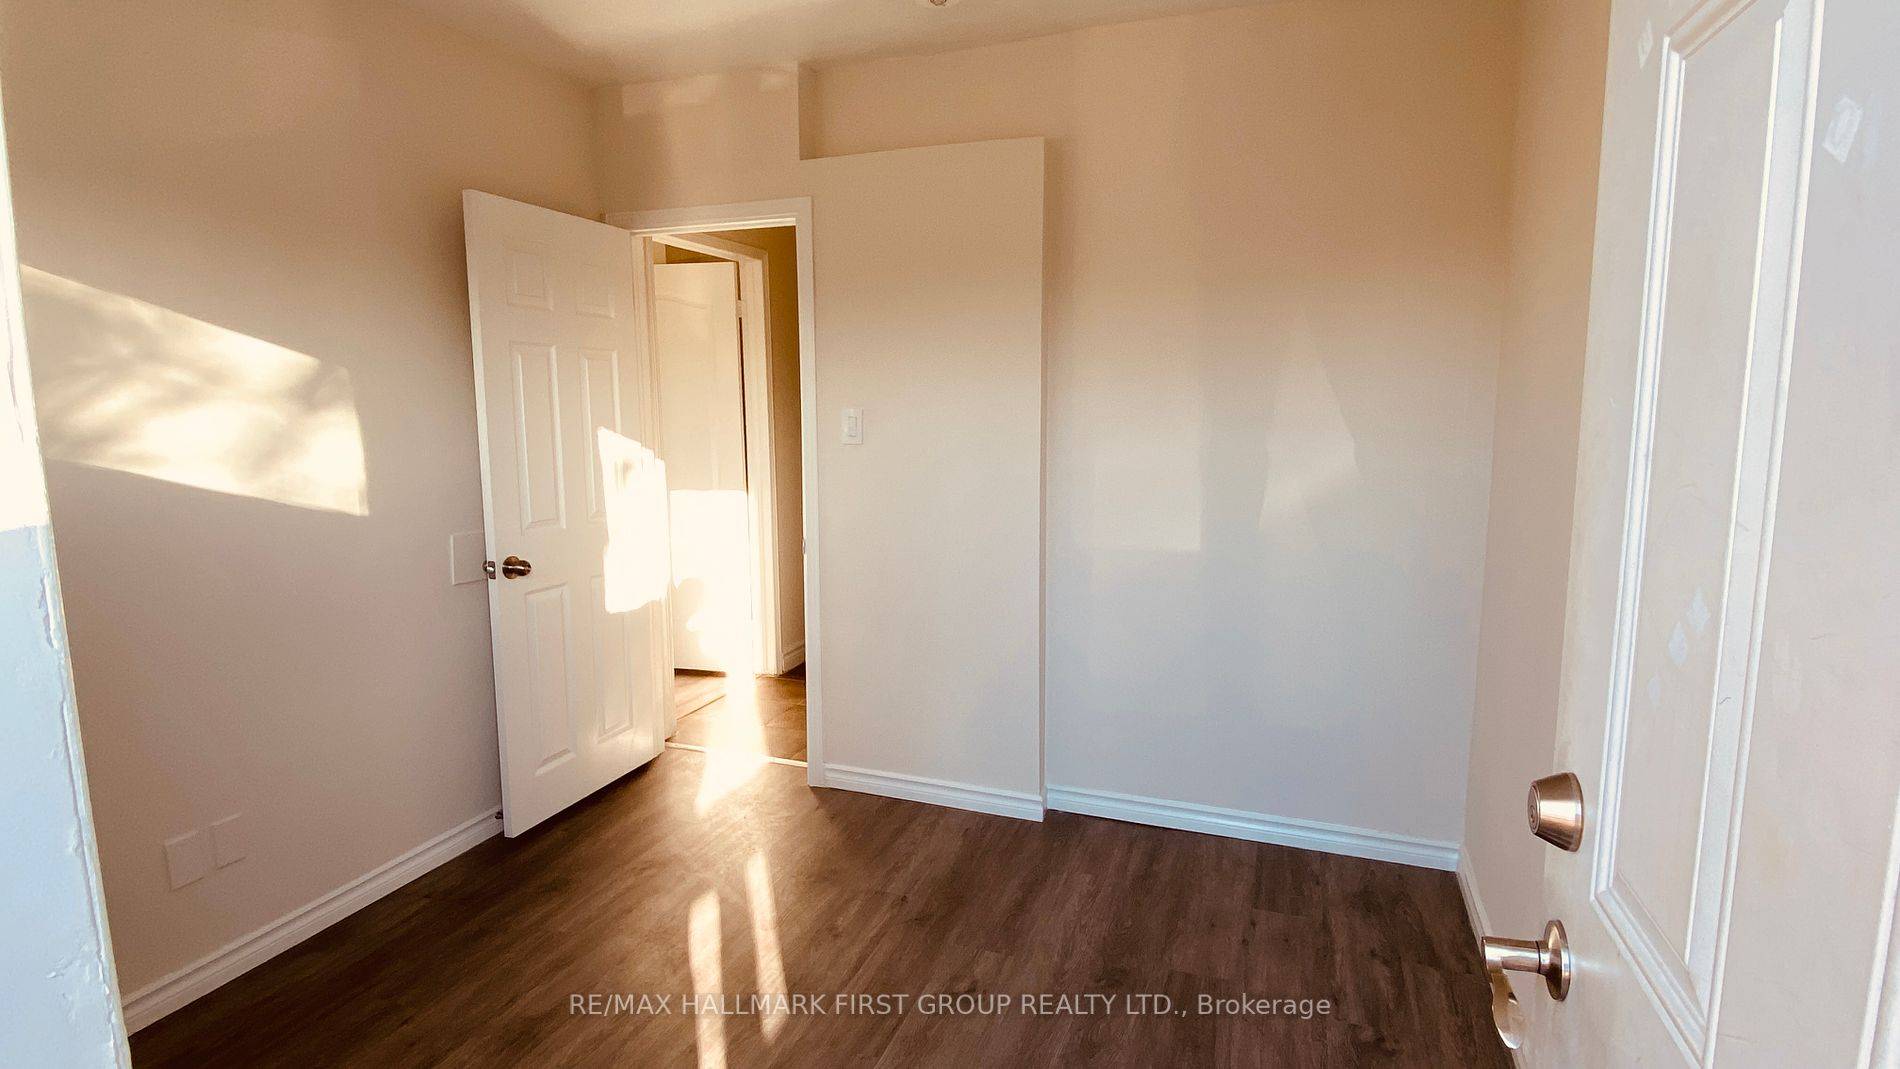 Fantastic Whitby Downtown Upper Floor Apartment Large Kitchen Open To Spacious Living Room High Ceiling Brings Lots Of Charm Newly Updated Front Back Entrances For Easy Access Large Bedroom With ...